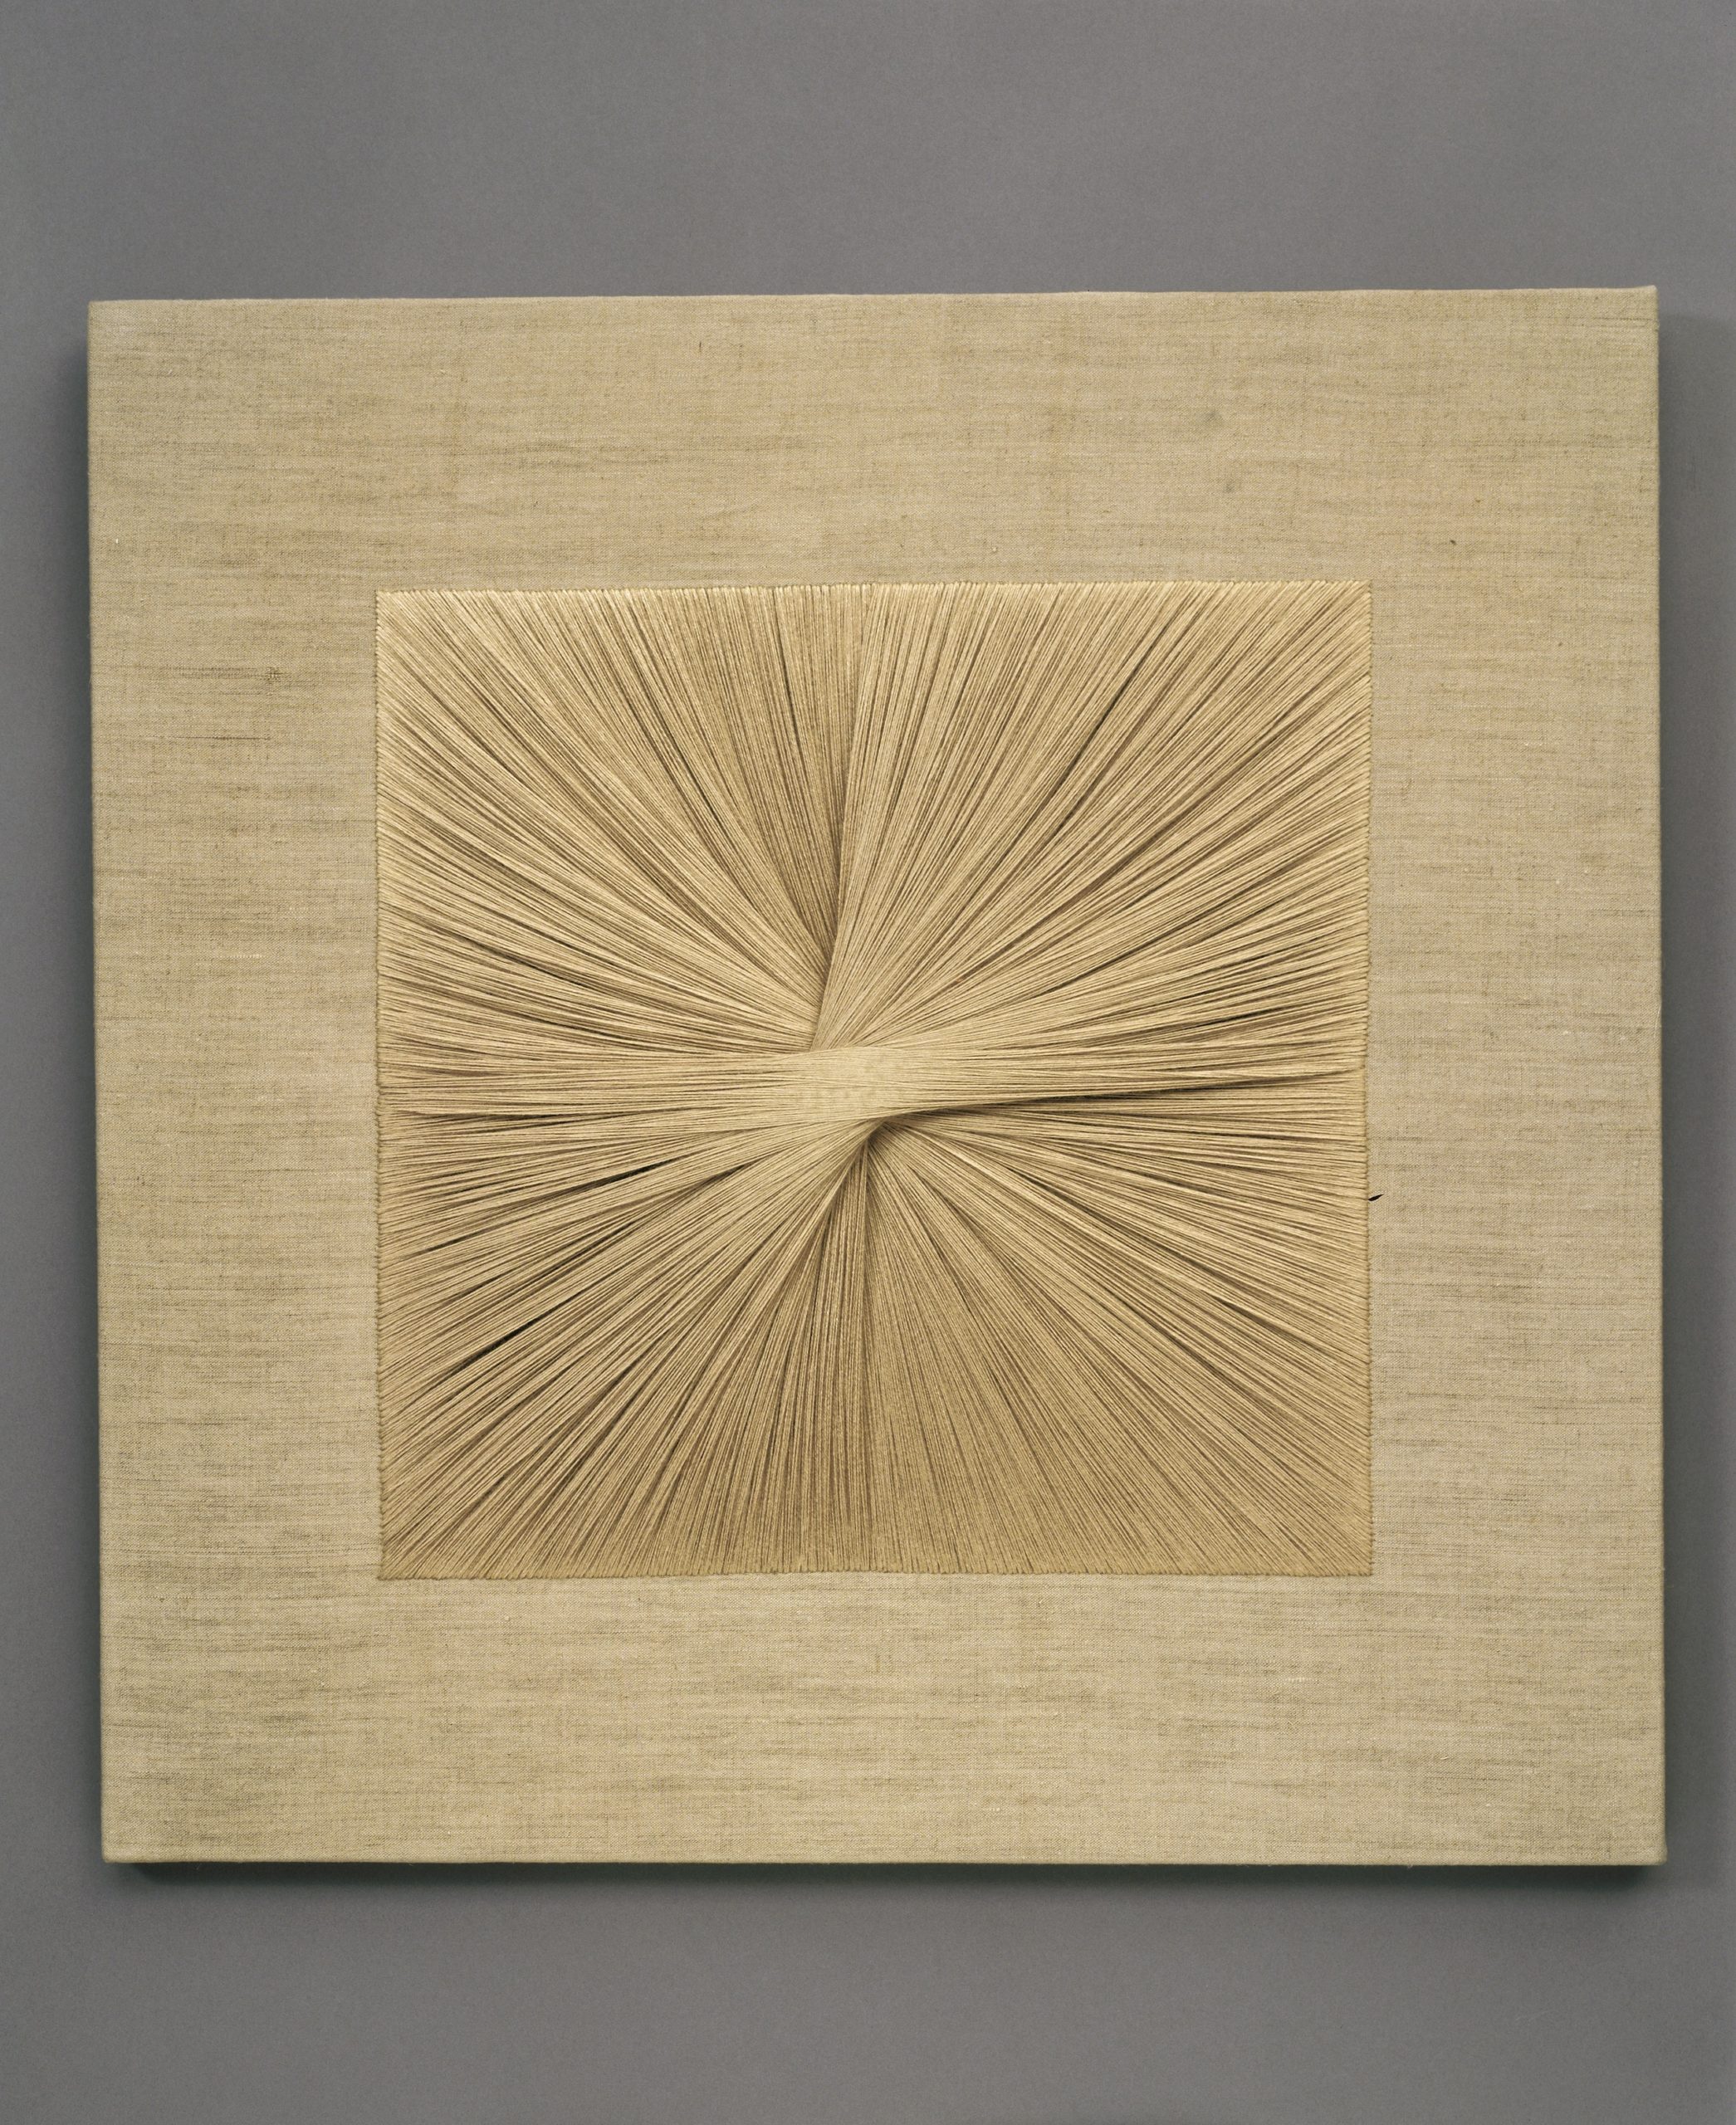 Square textile panel uses beige thread to create a starburst pattern as the central focus.